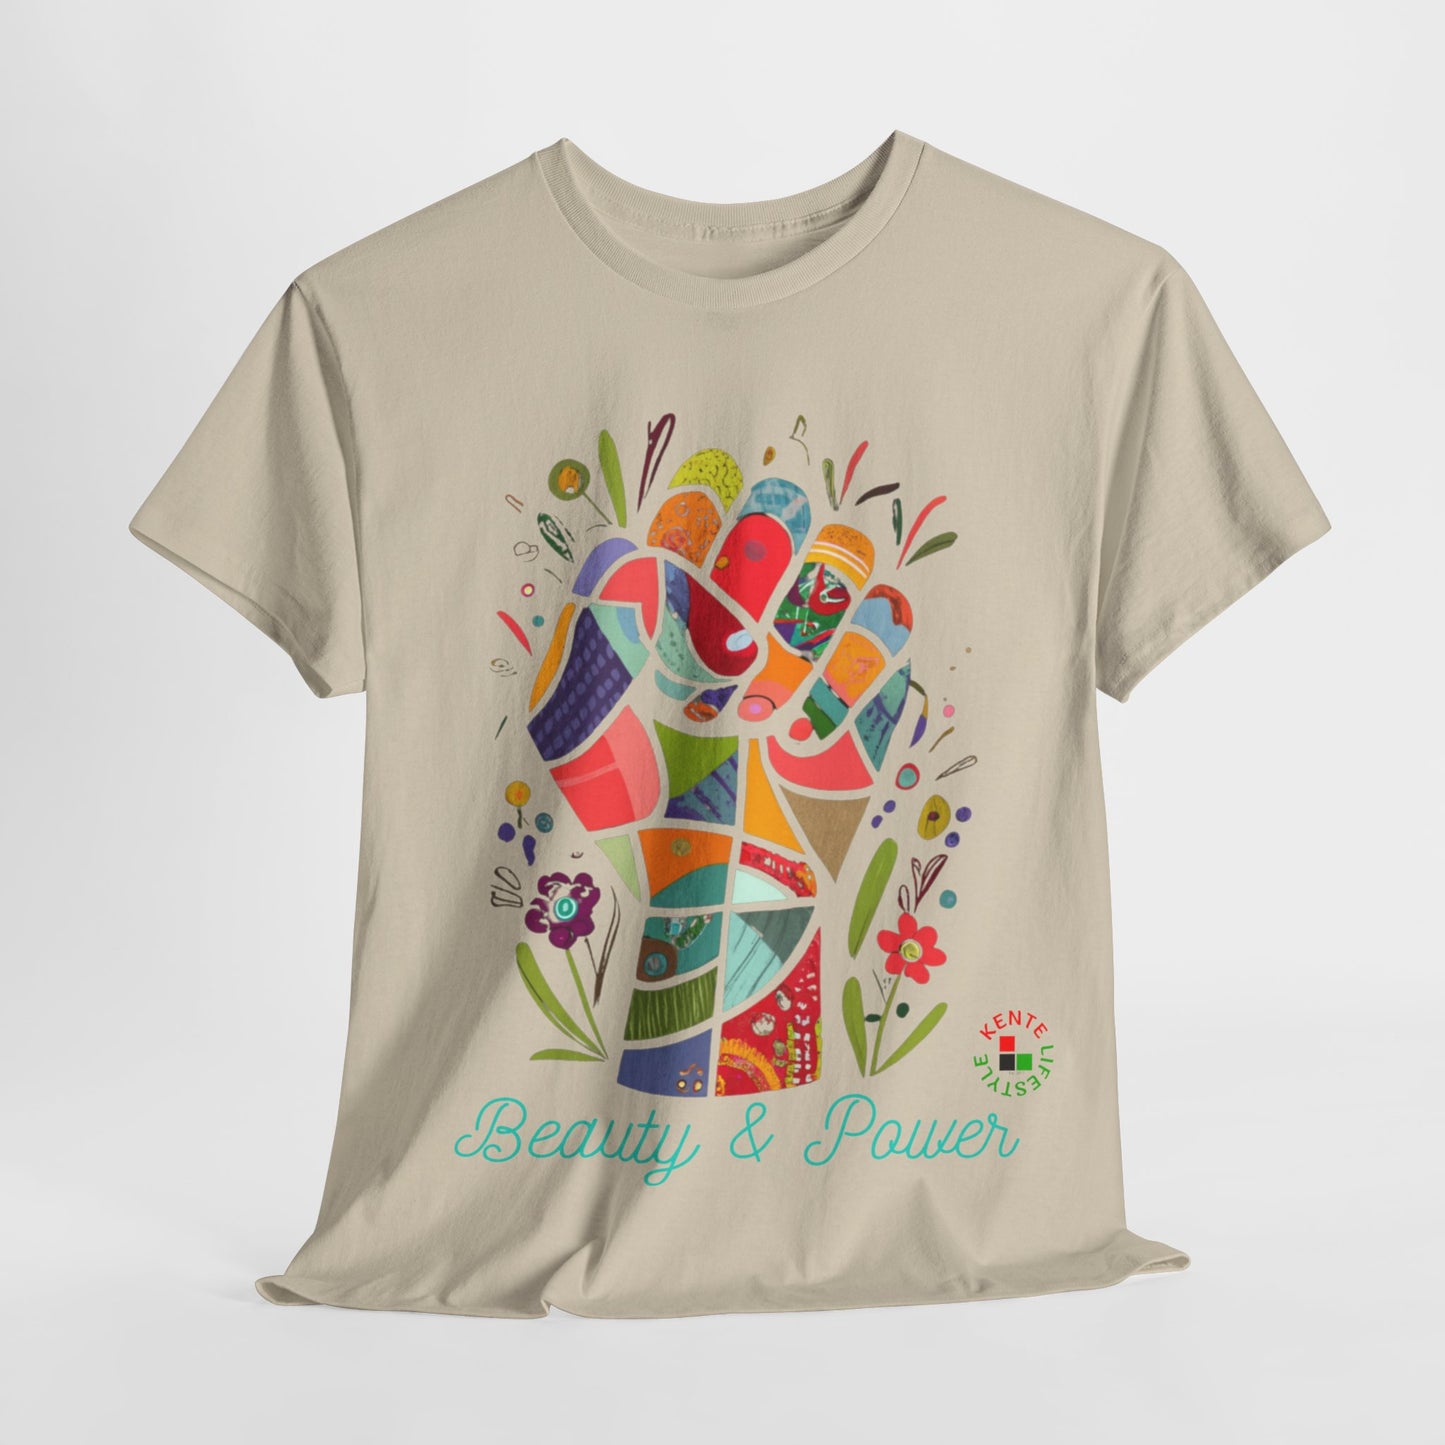 "Beauty and Power" T-shirt